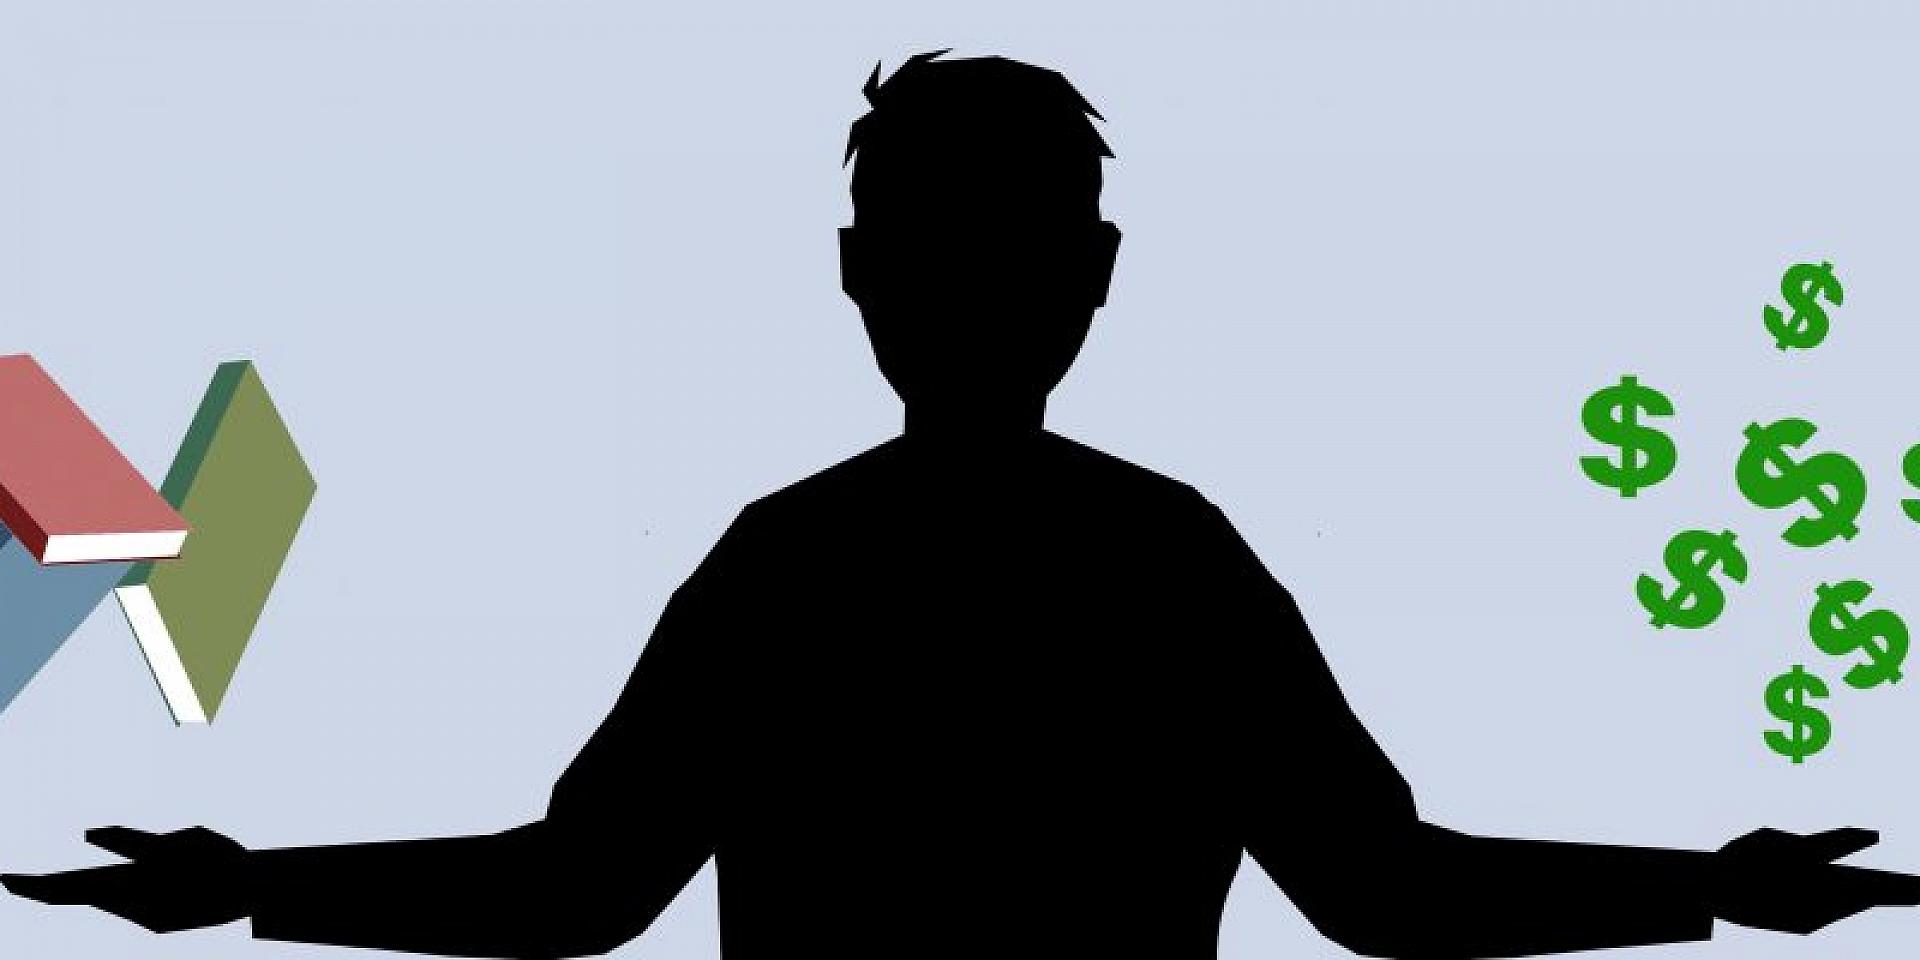 Silhouette of a man balancing school and money